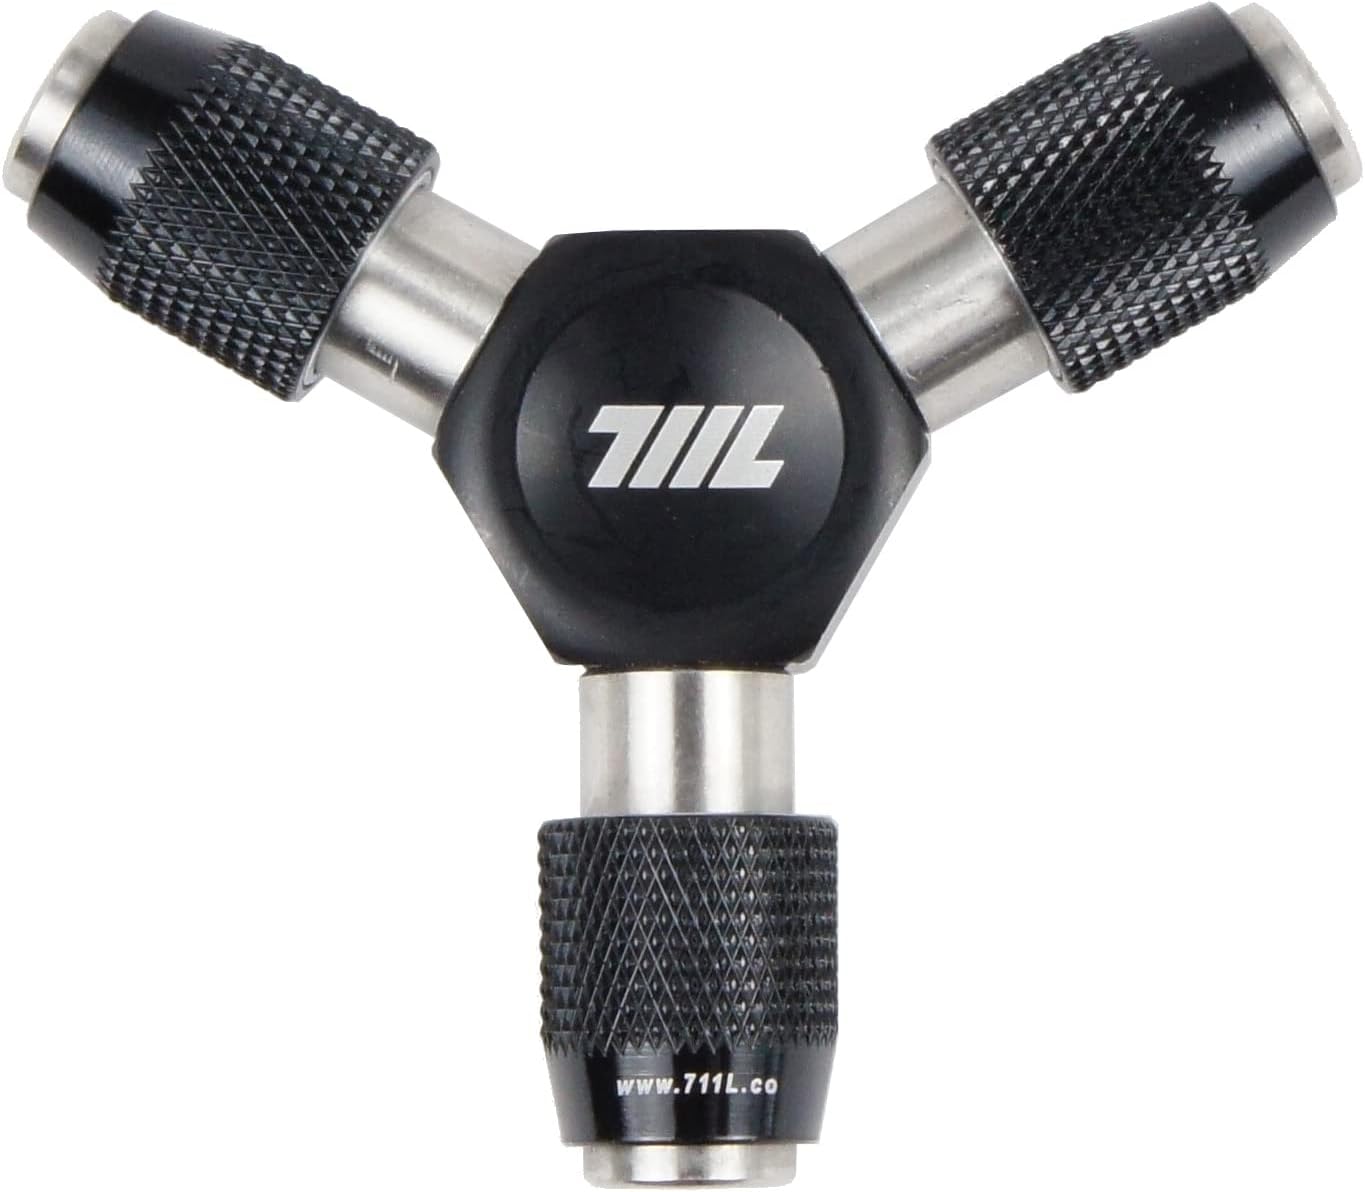 711L EDC Y Driver, 3 Way 1/4 Inch Hex Bit Holder, Y Type Hex Socket Wrench, Tri Wrench, Hex Key Handle I Compact Bicycle Scooter Too